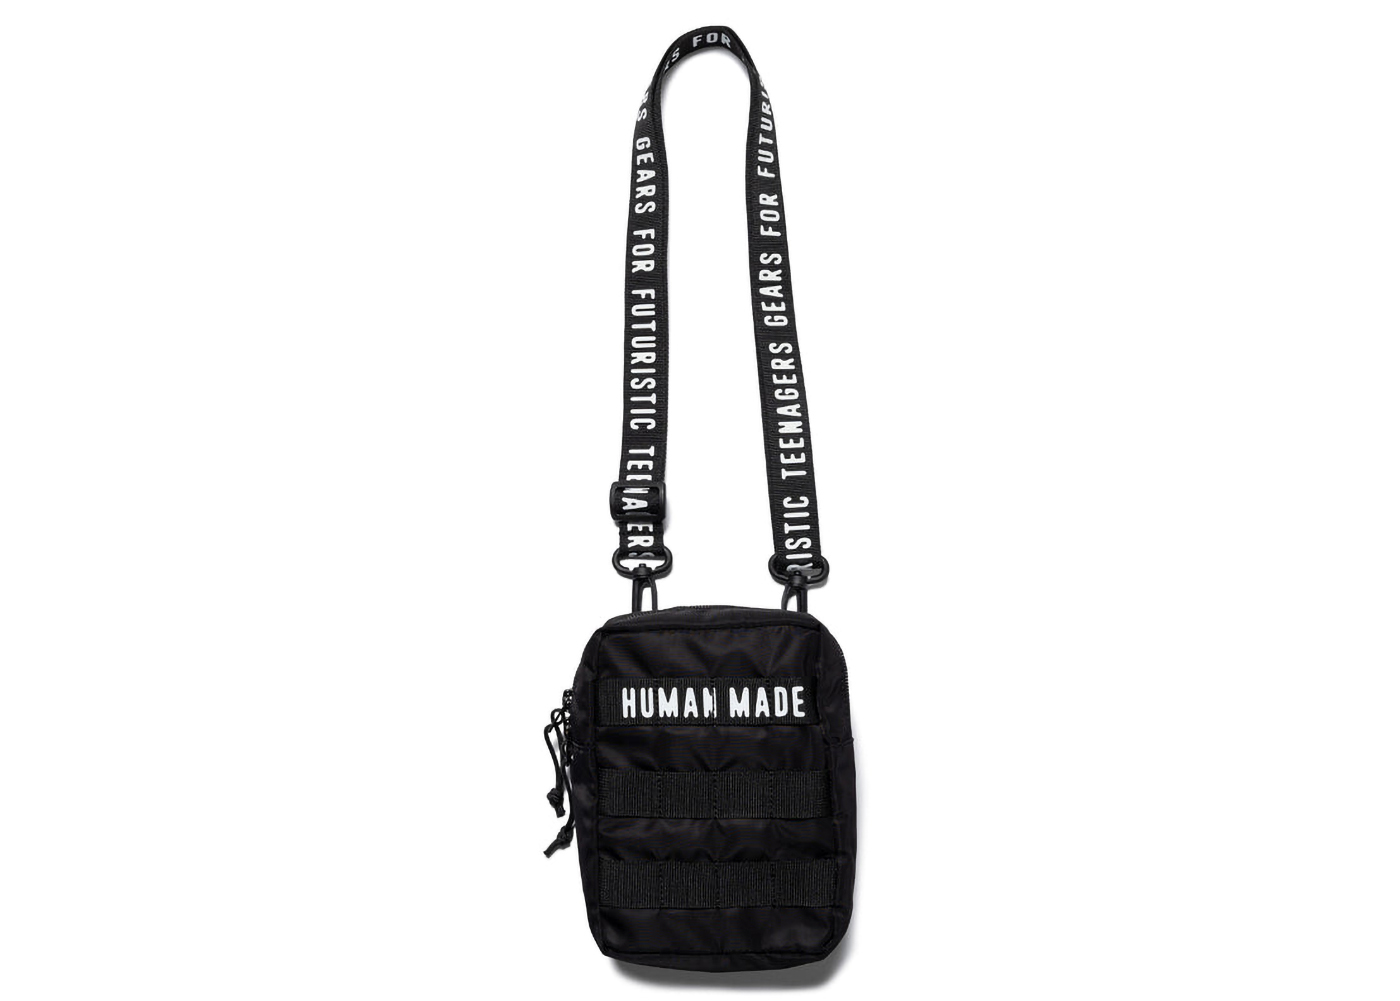 HUMAN MADE Military Pouch #2 Black-